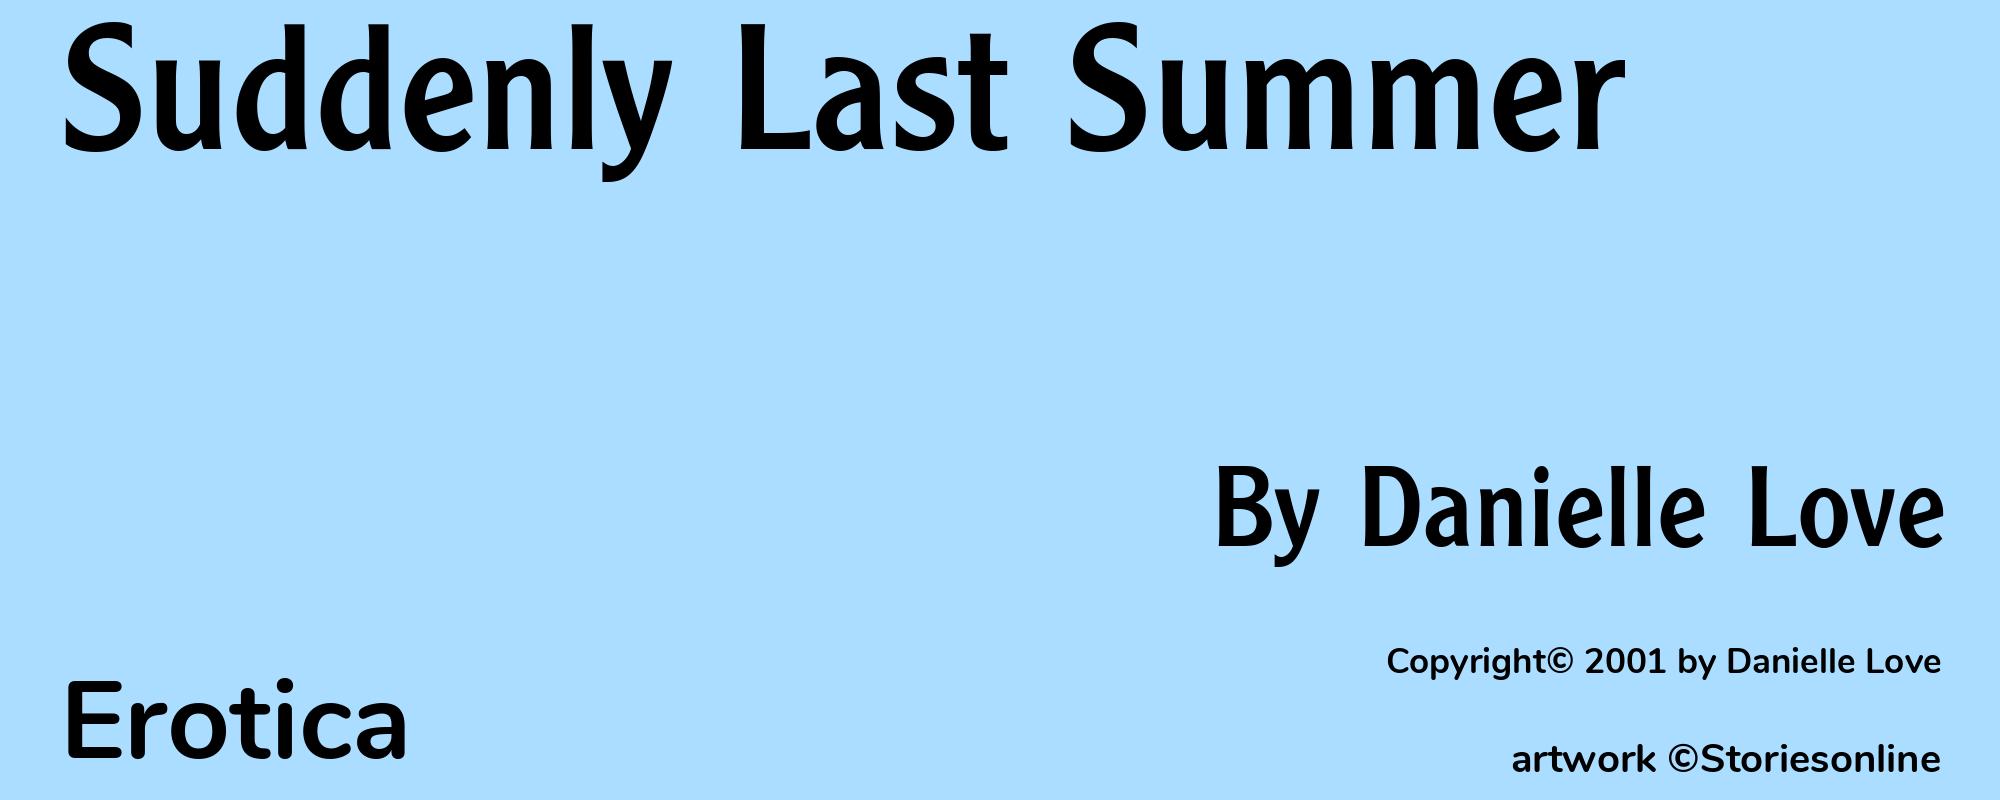 Suddenly Last Summer - Cover